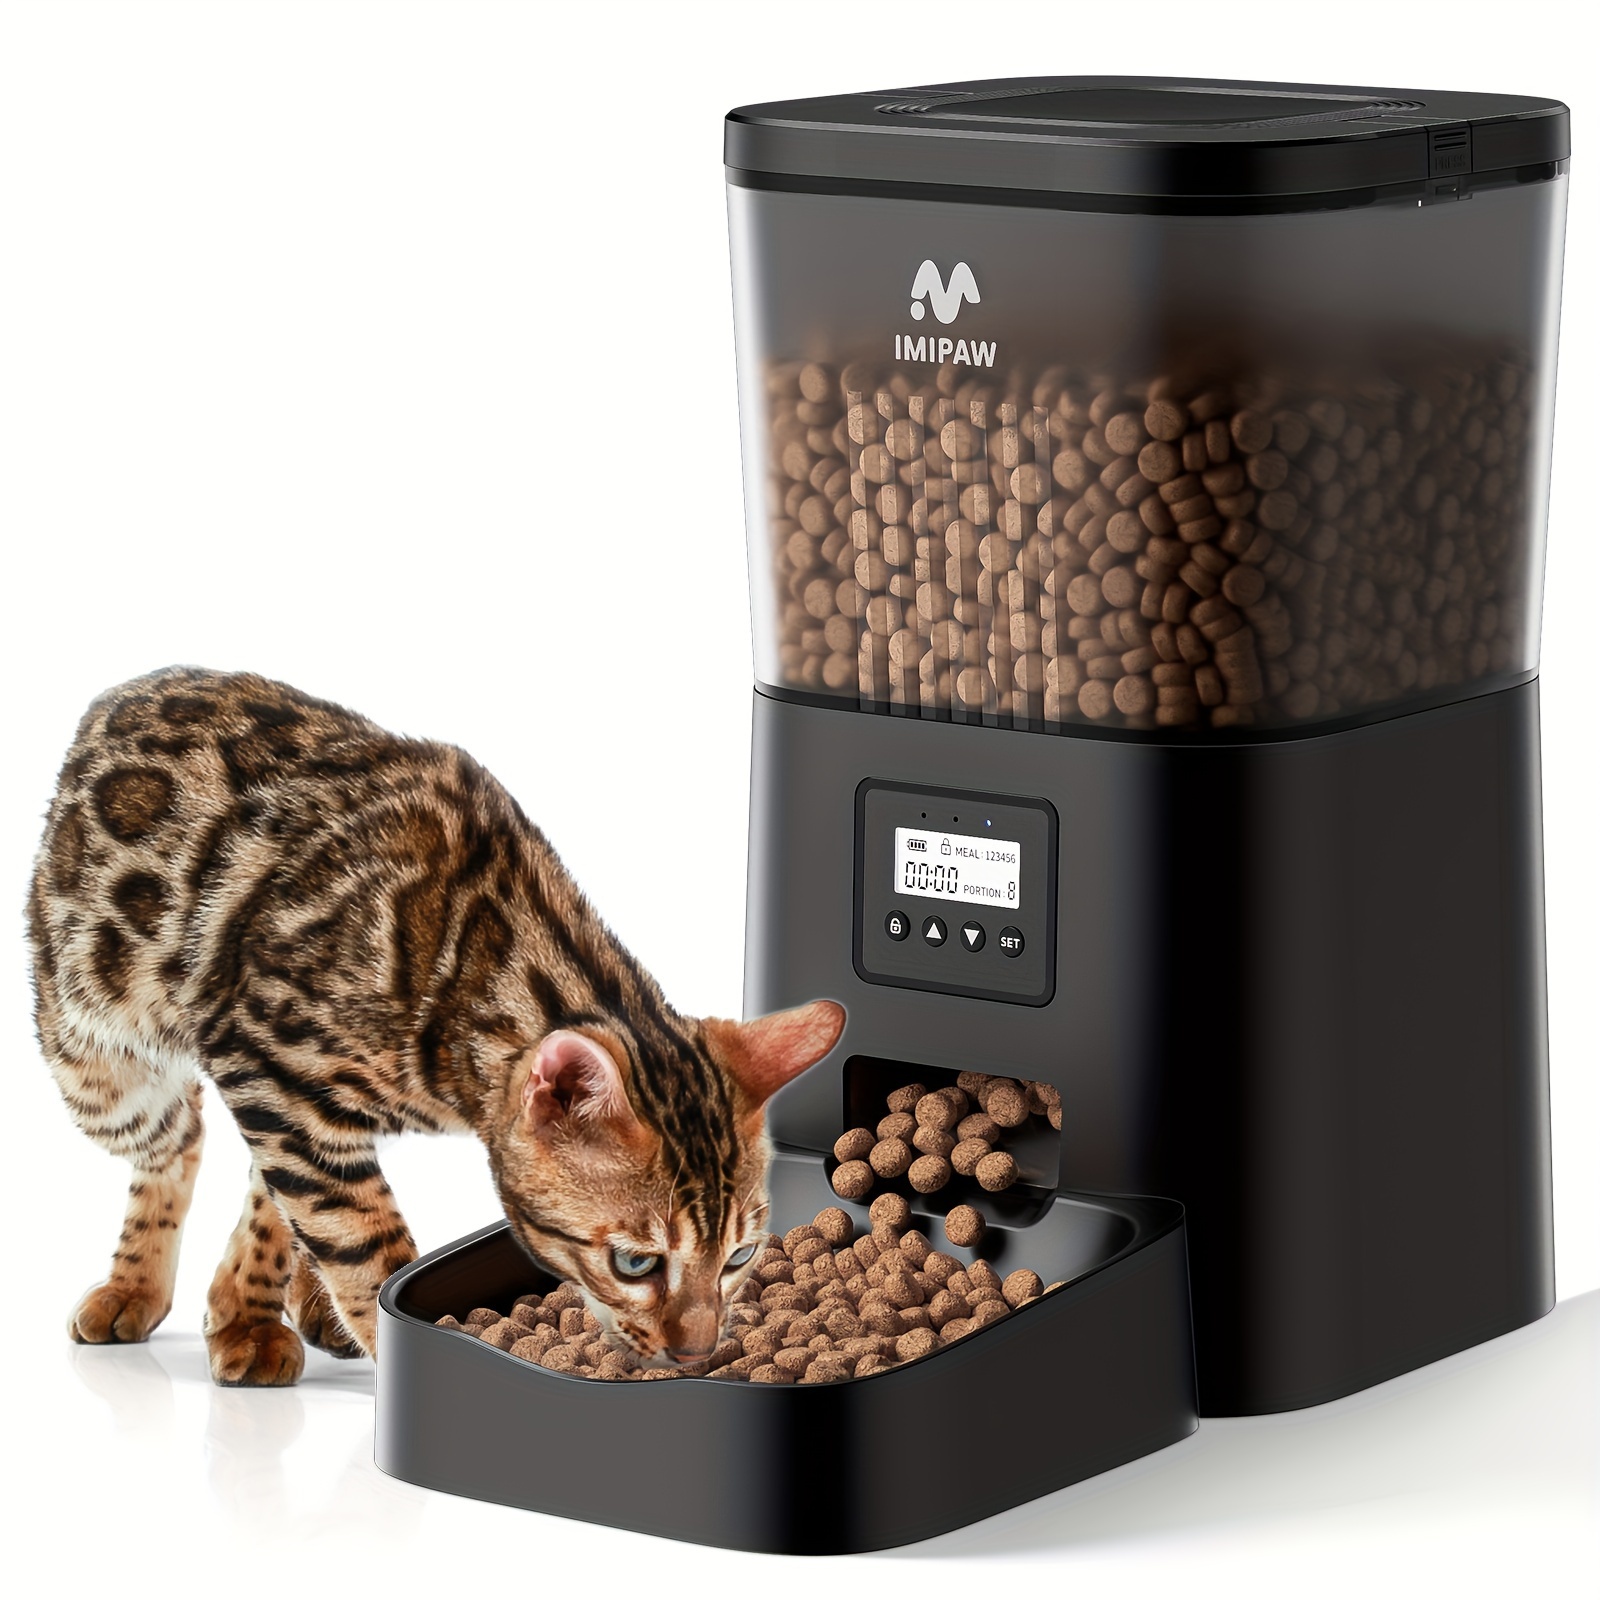 

Imipaw 4l Automatic Pet Feeder - Timed & Portion-controlled Cat And Dog Food Dispenser With Long-lasting Battery, Usb Compatible